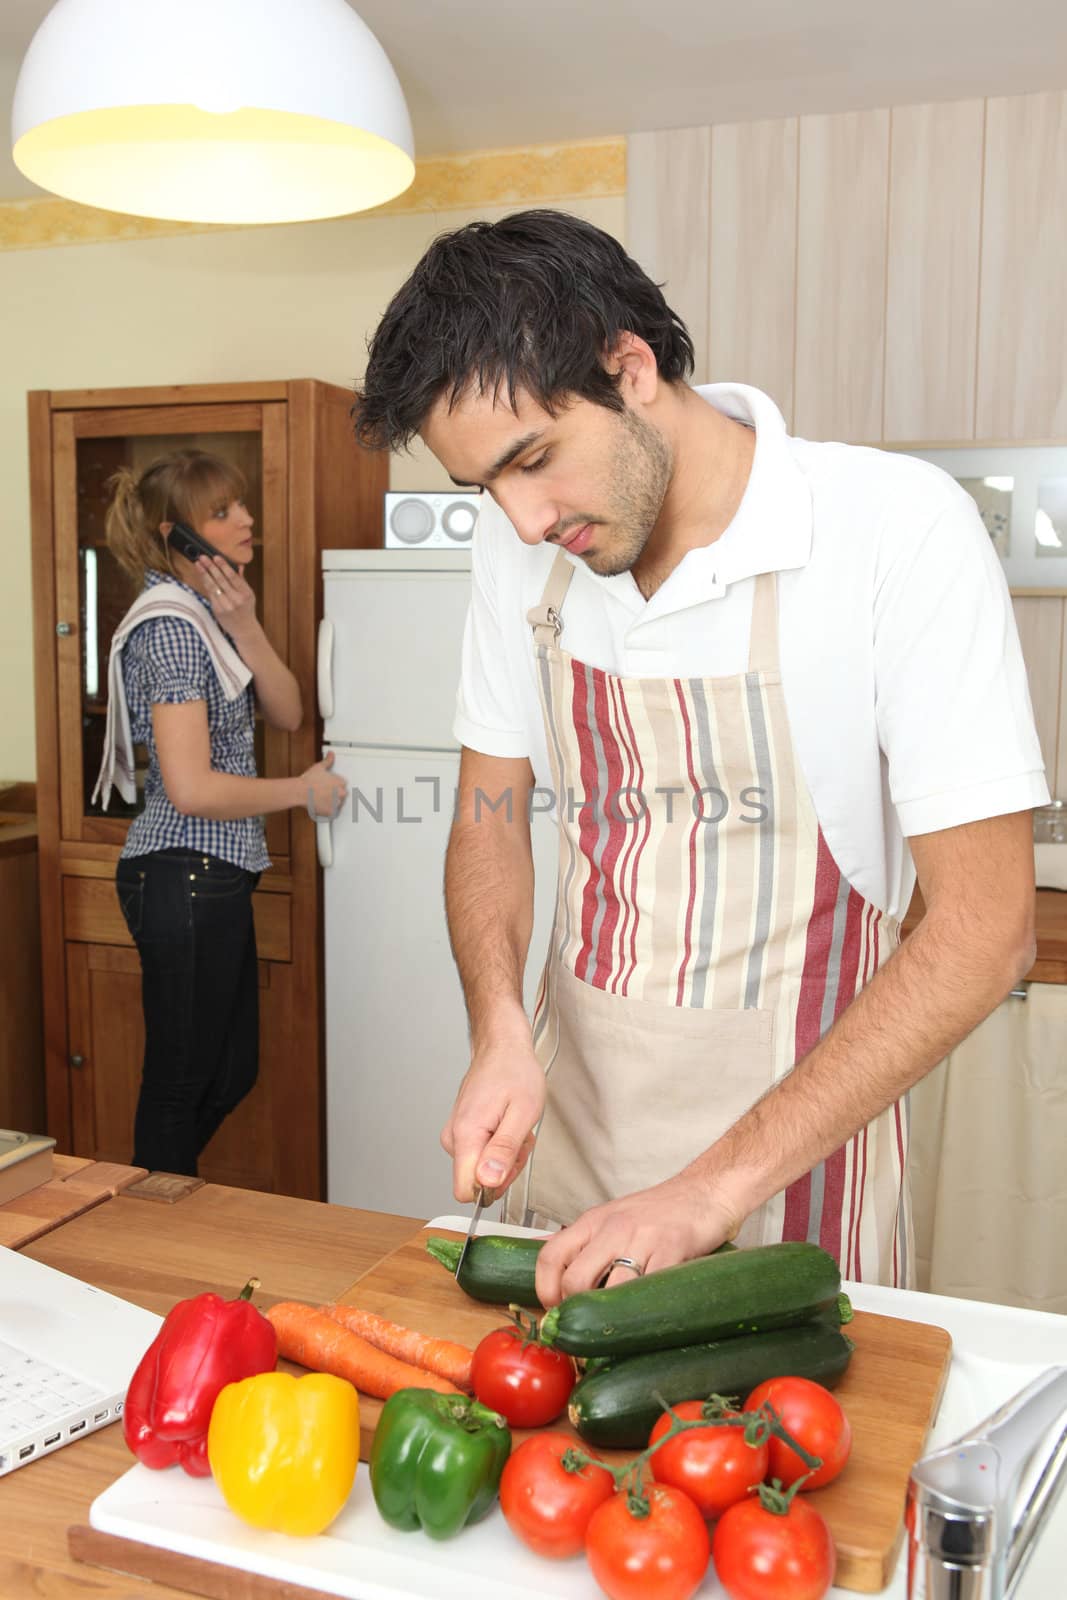 Woman on phone and man preparing meal by phovoir